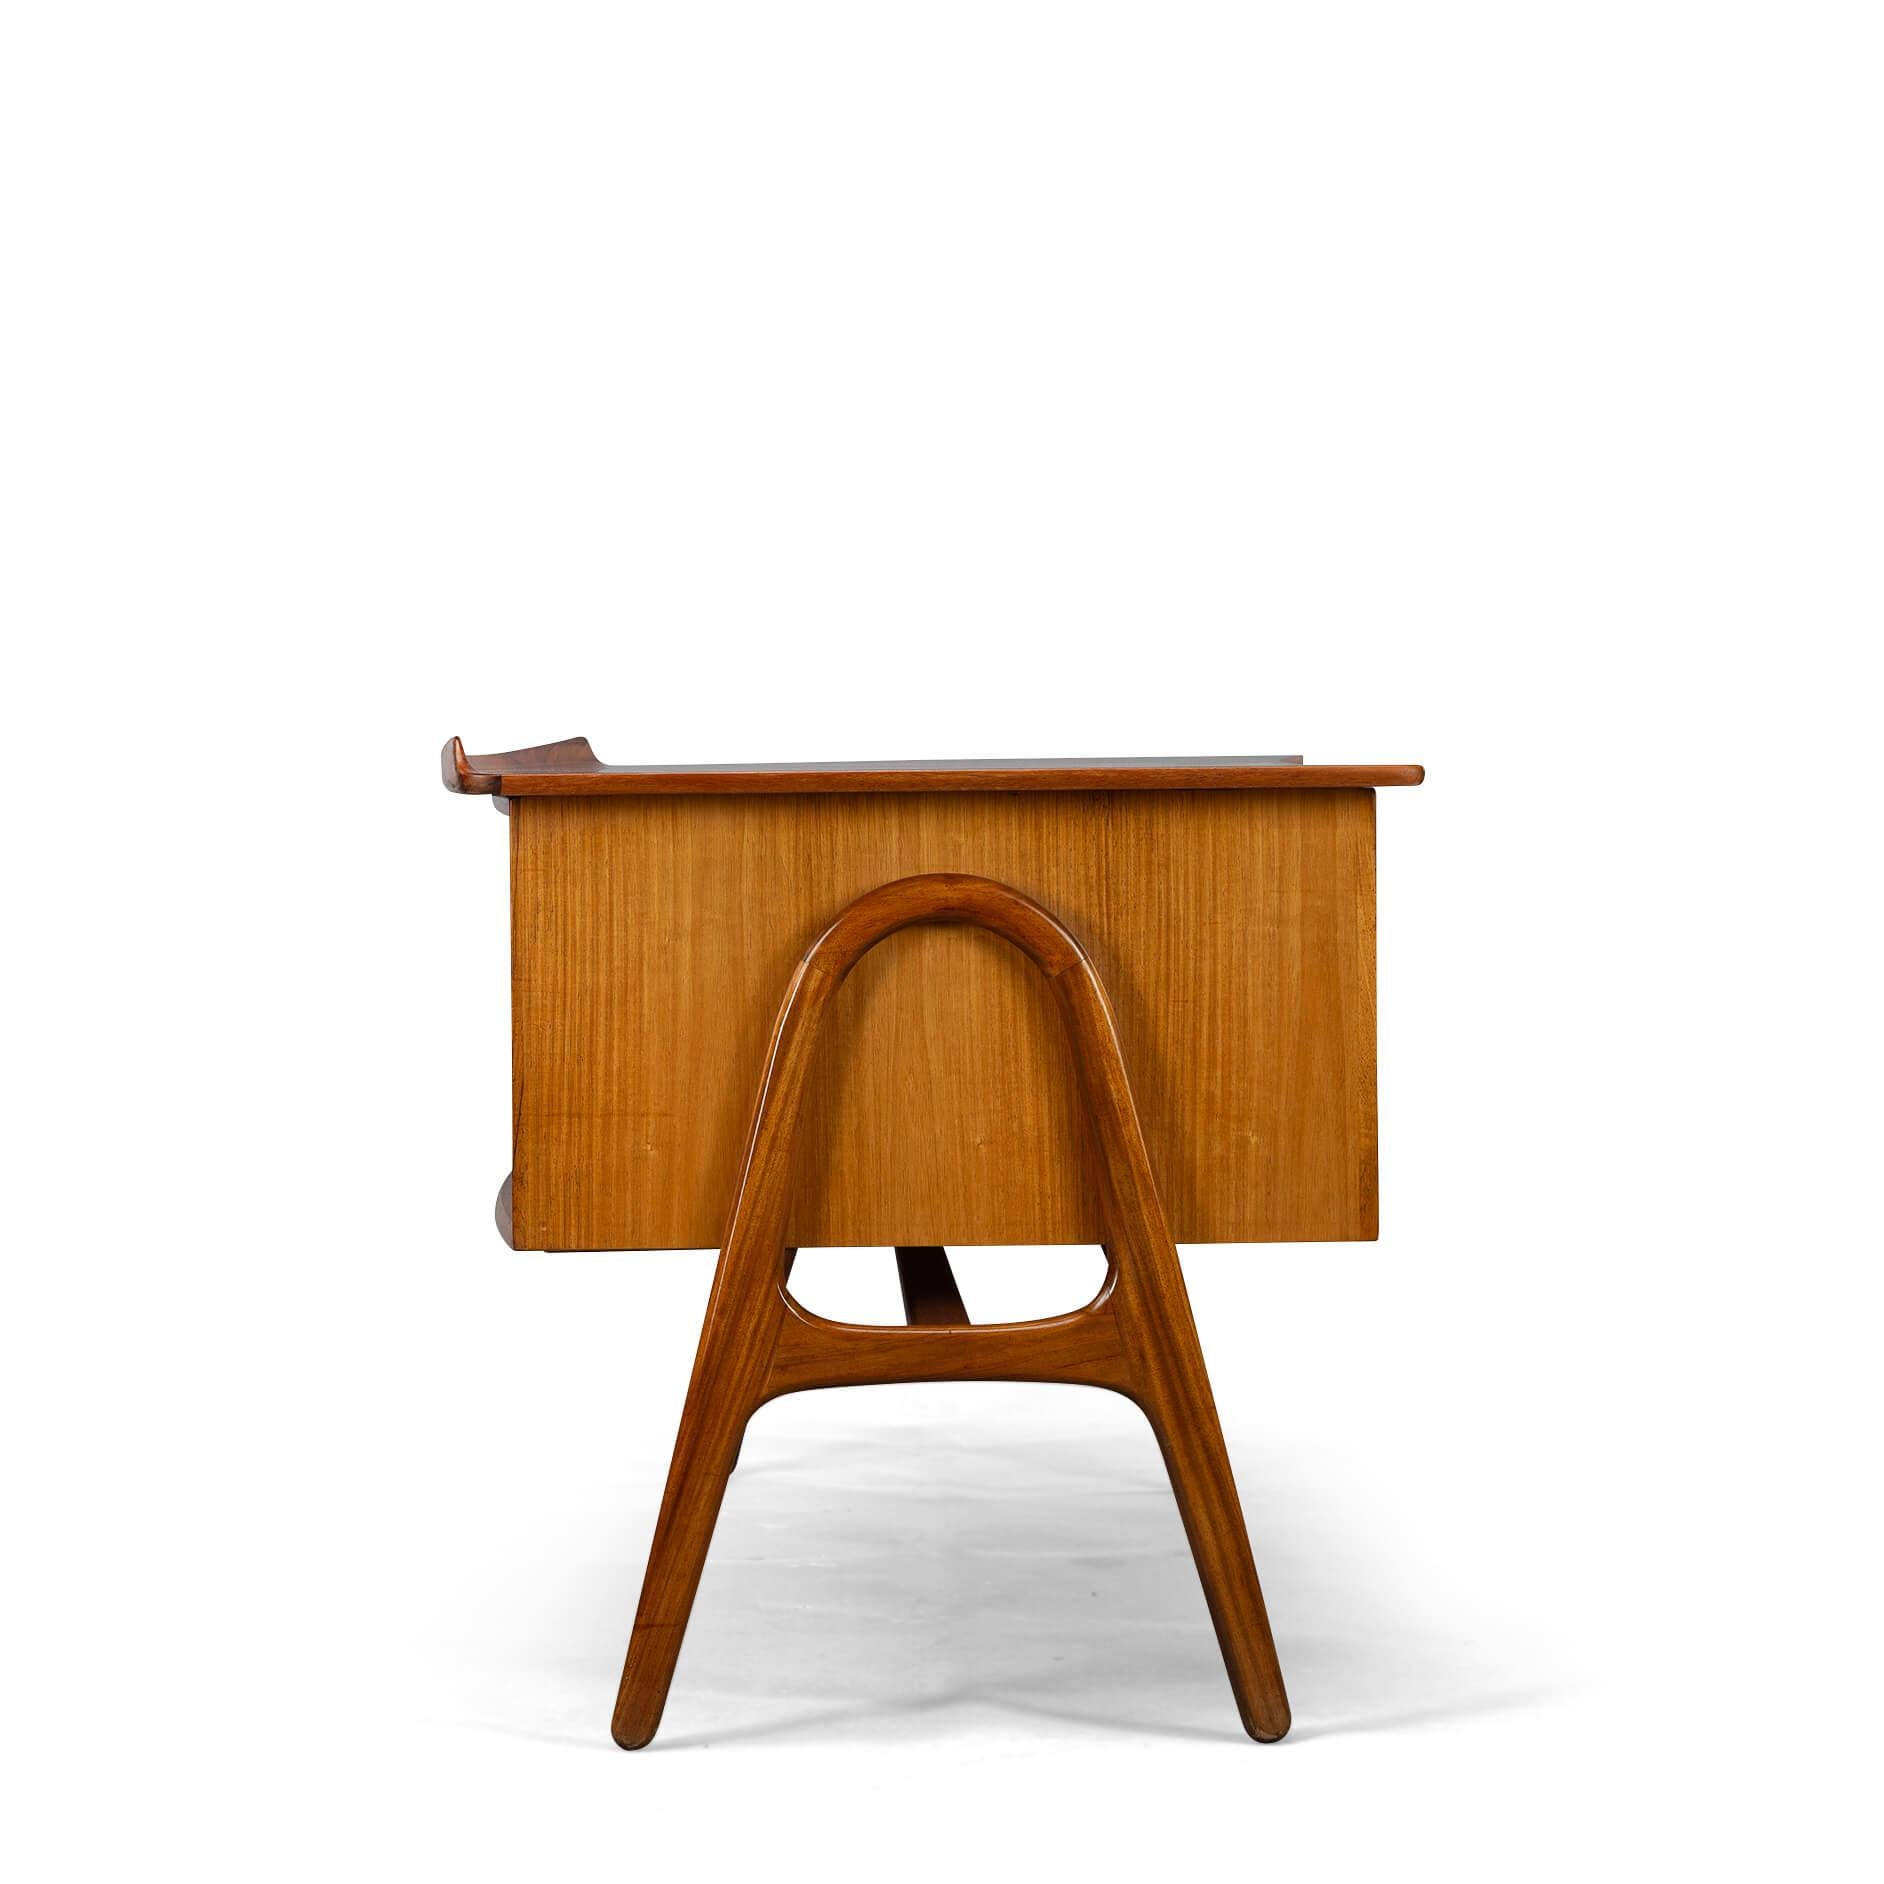 Design desk
An exclusive mid-century modern large desk was designed by Svend Madsen and manufactured by HP Hansen in Denmark in the 1960s. This elegant desk features a bowed large top with beautiful rosewood wood grain and a raised lip edge. The